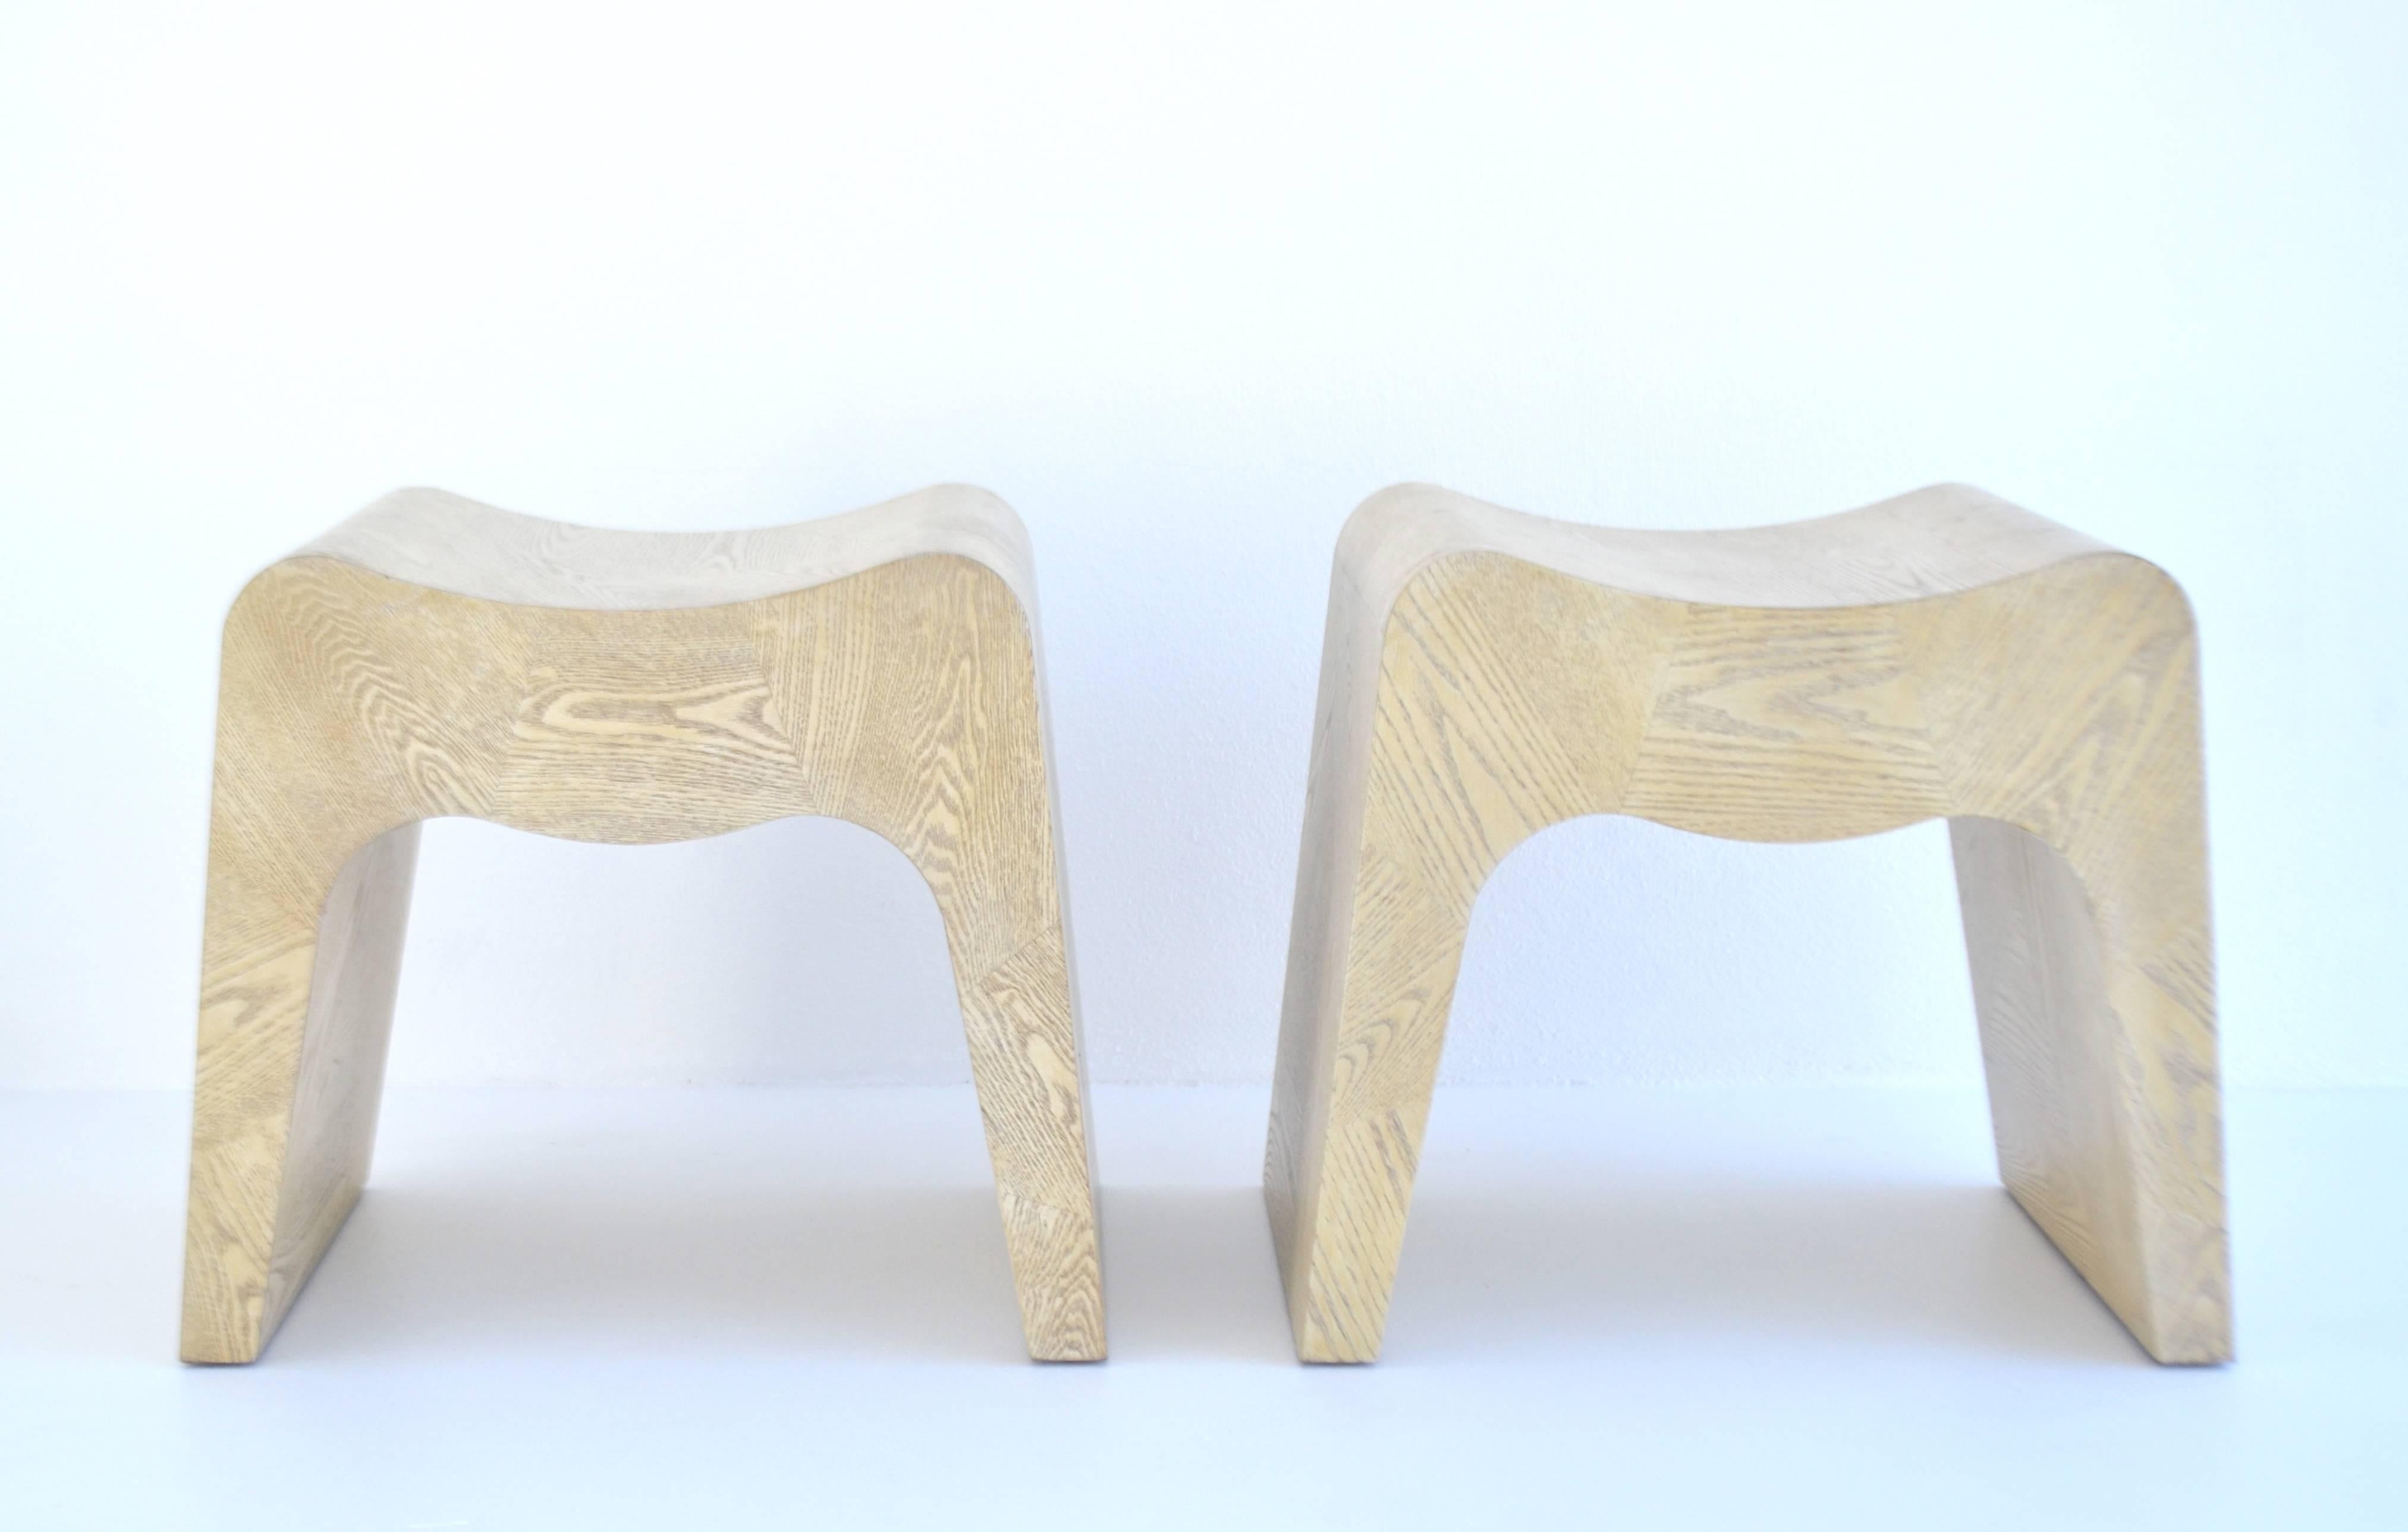 Striking pair of sculptural Postmodern stools, France, 1980s. These custom artisan crafted benches are designed of cerused oak veneer geometrical parquet patterns over molded solid wood forms.